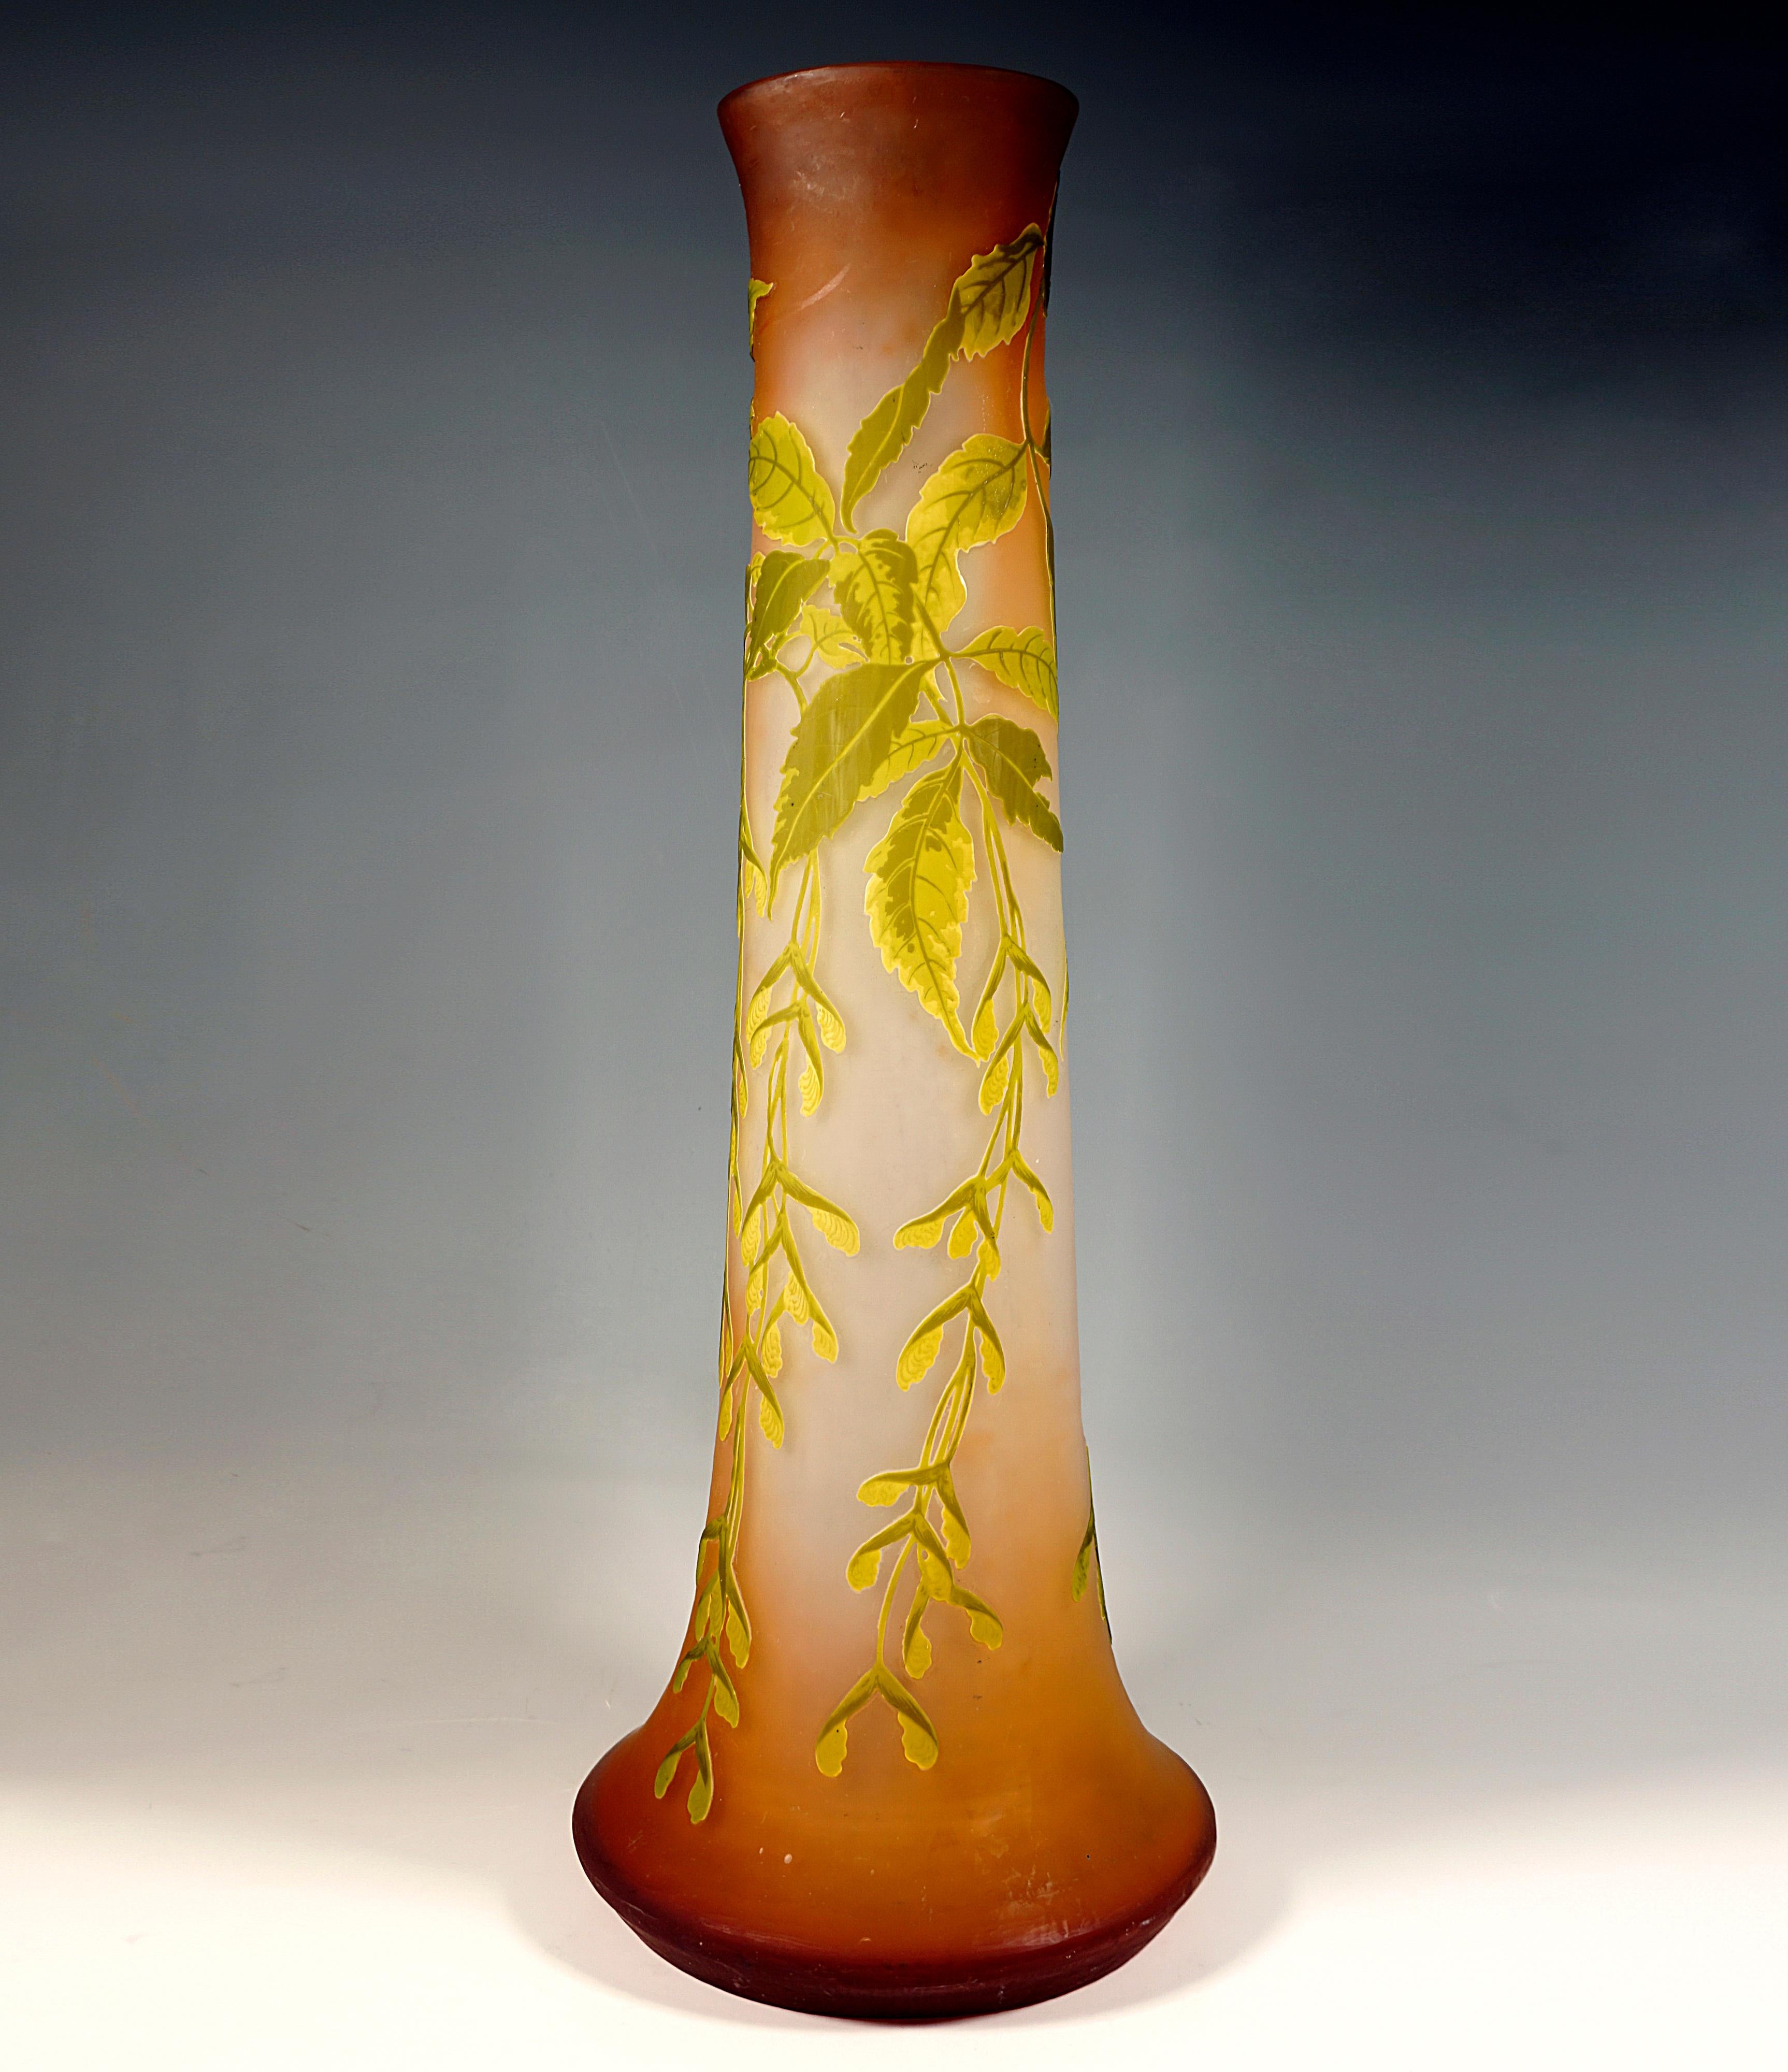 Large vase on a round stand, widening like a bulge and then narrowing to a slightly conical, long, wide neck, opening with slightly flared mouth rim, colourless glass with orange-brown colour powder fusions, overflows in yellow and green, highly